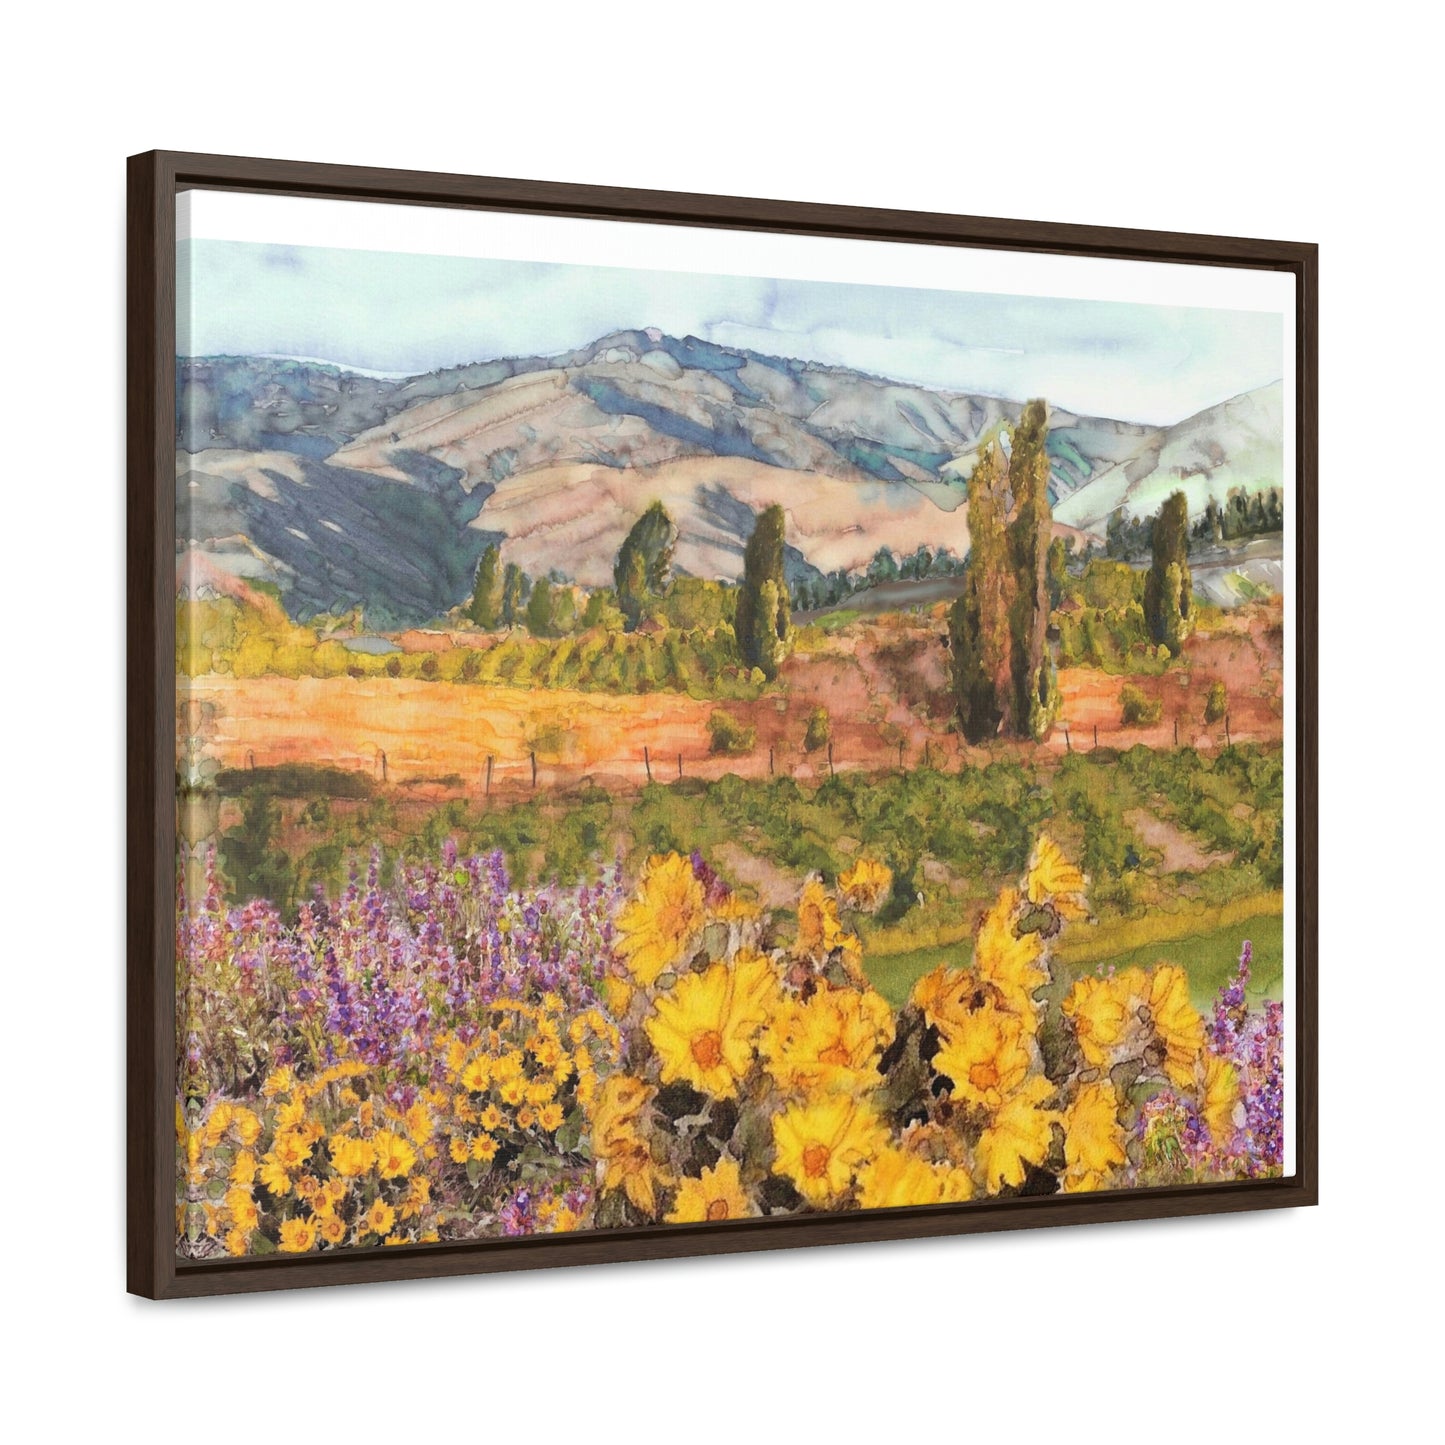 "Chelan Vineyard with Balsom" Wood-Framed Gallery Canvas Wrap - Kerry Siderius Art 